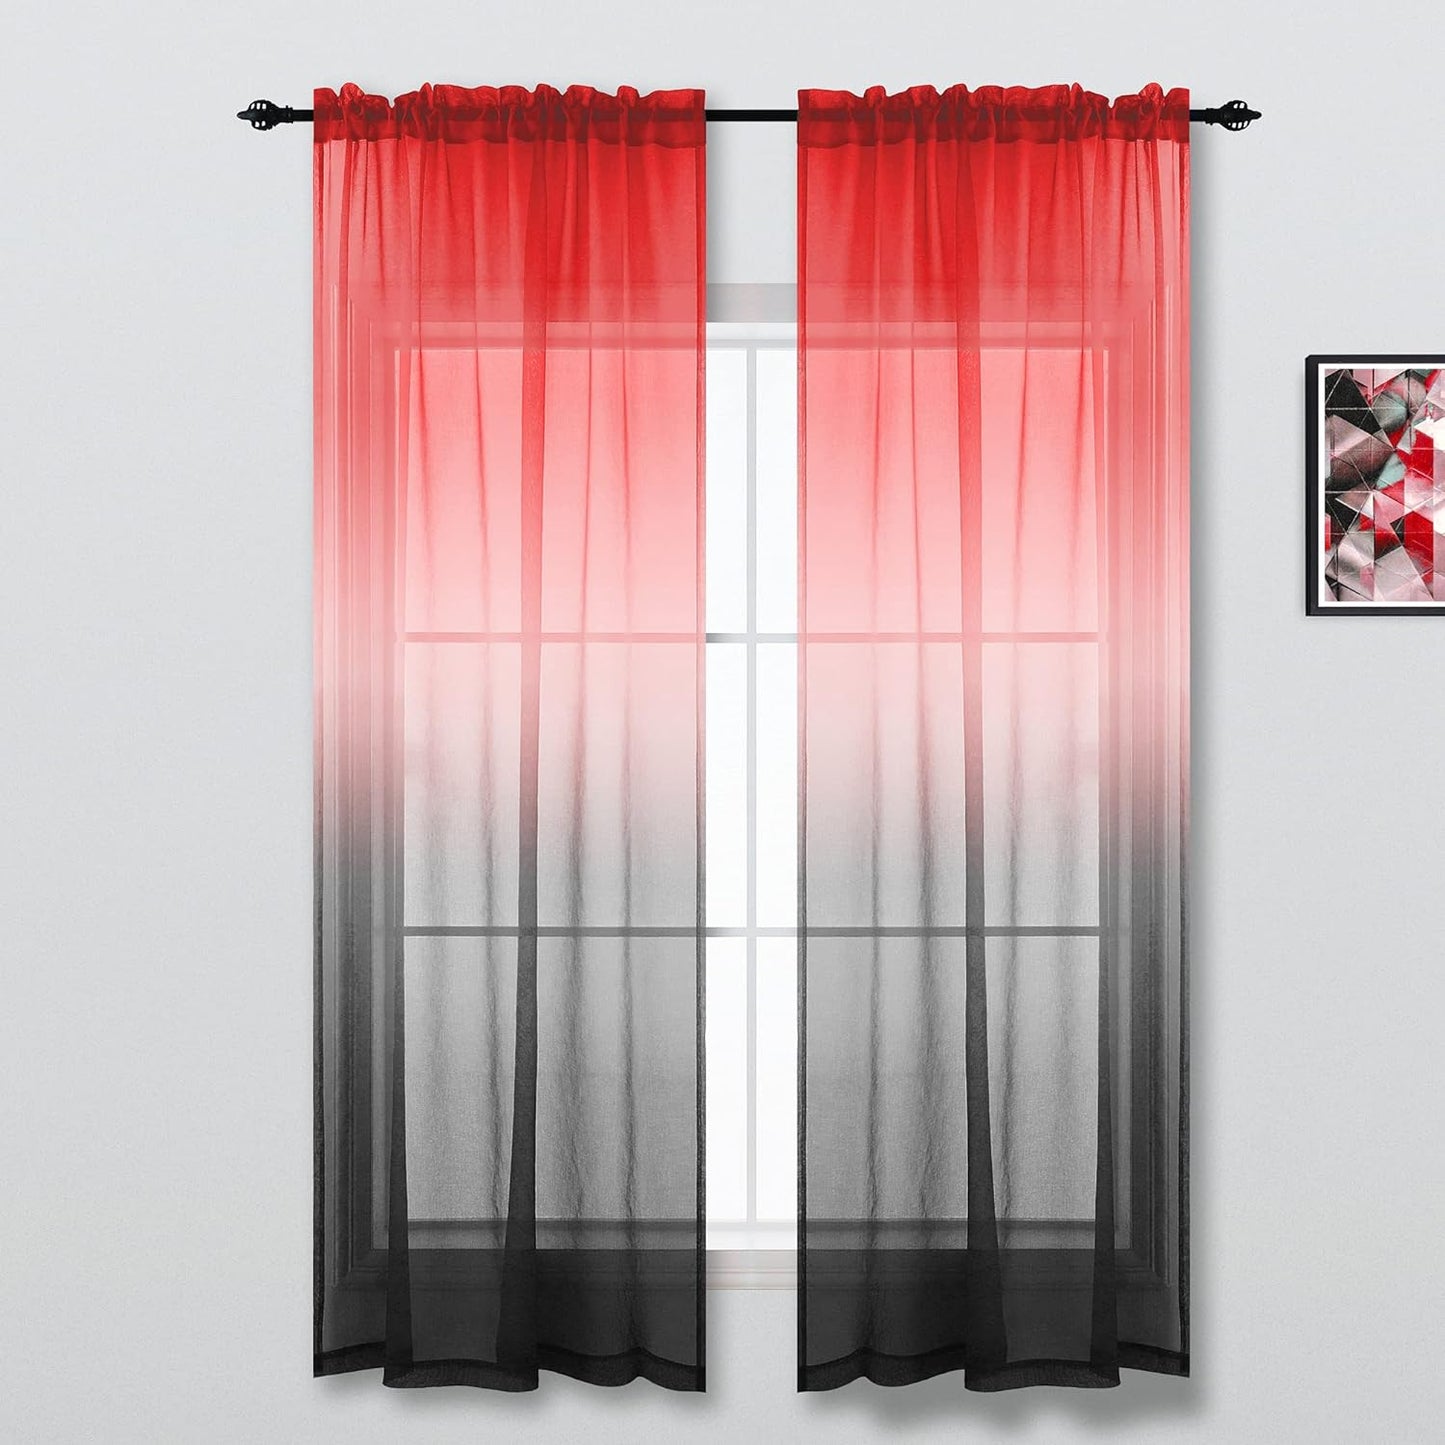 KOUFALL Kids Curtains 2 Panel Set for Bedroom Girls Room Mermaid Decor,Sheer Ombre Baby Curtains for Nursery,Purple and Teal,63 Inch Length  KOUFALL TEXTILE Red And Black 52X63 